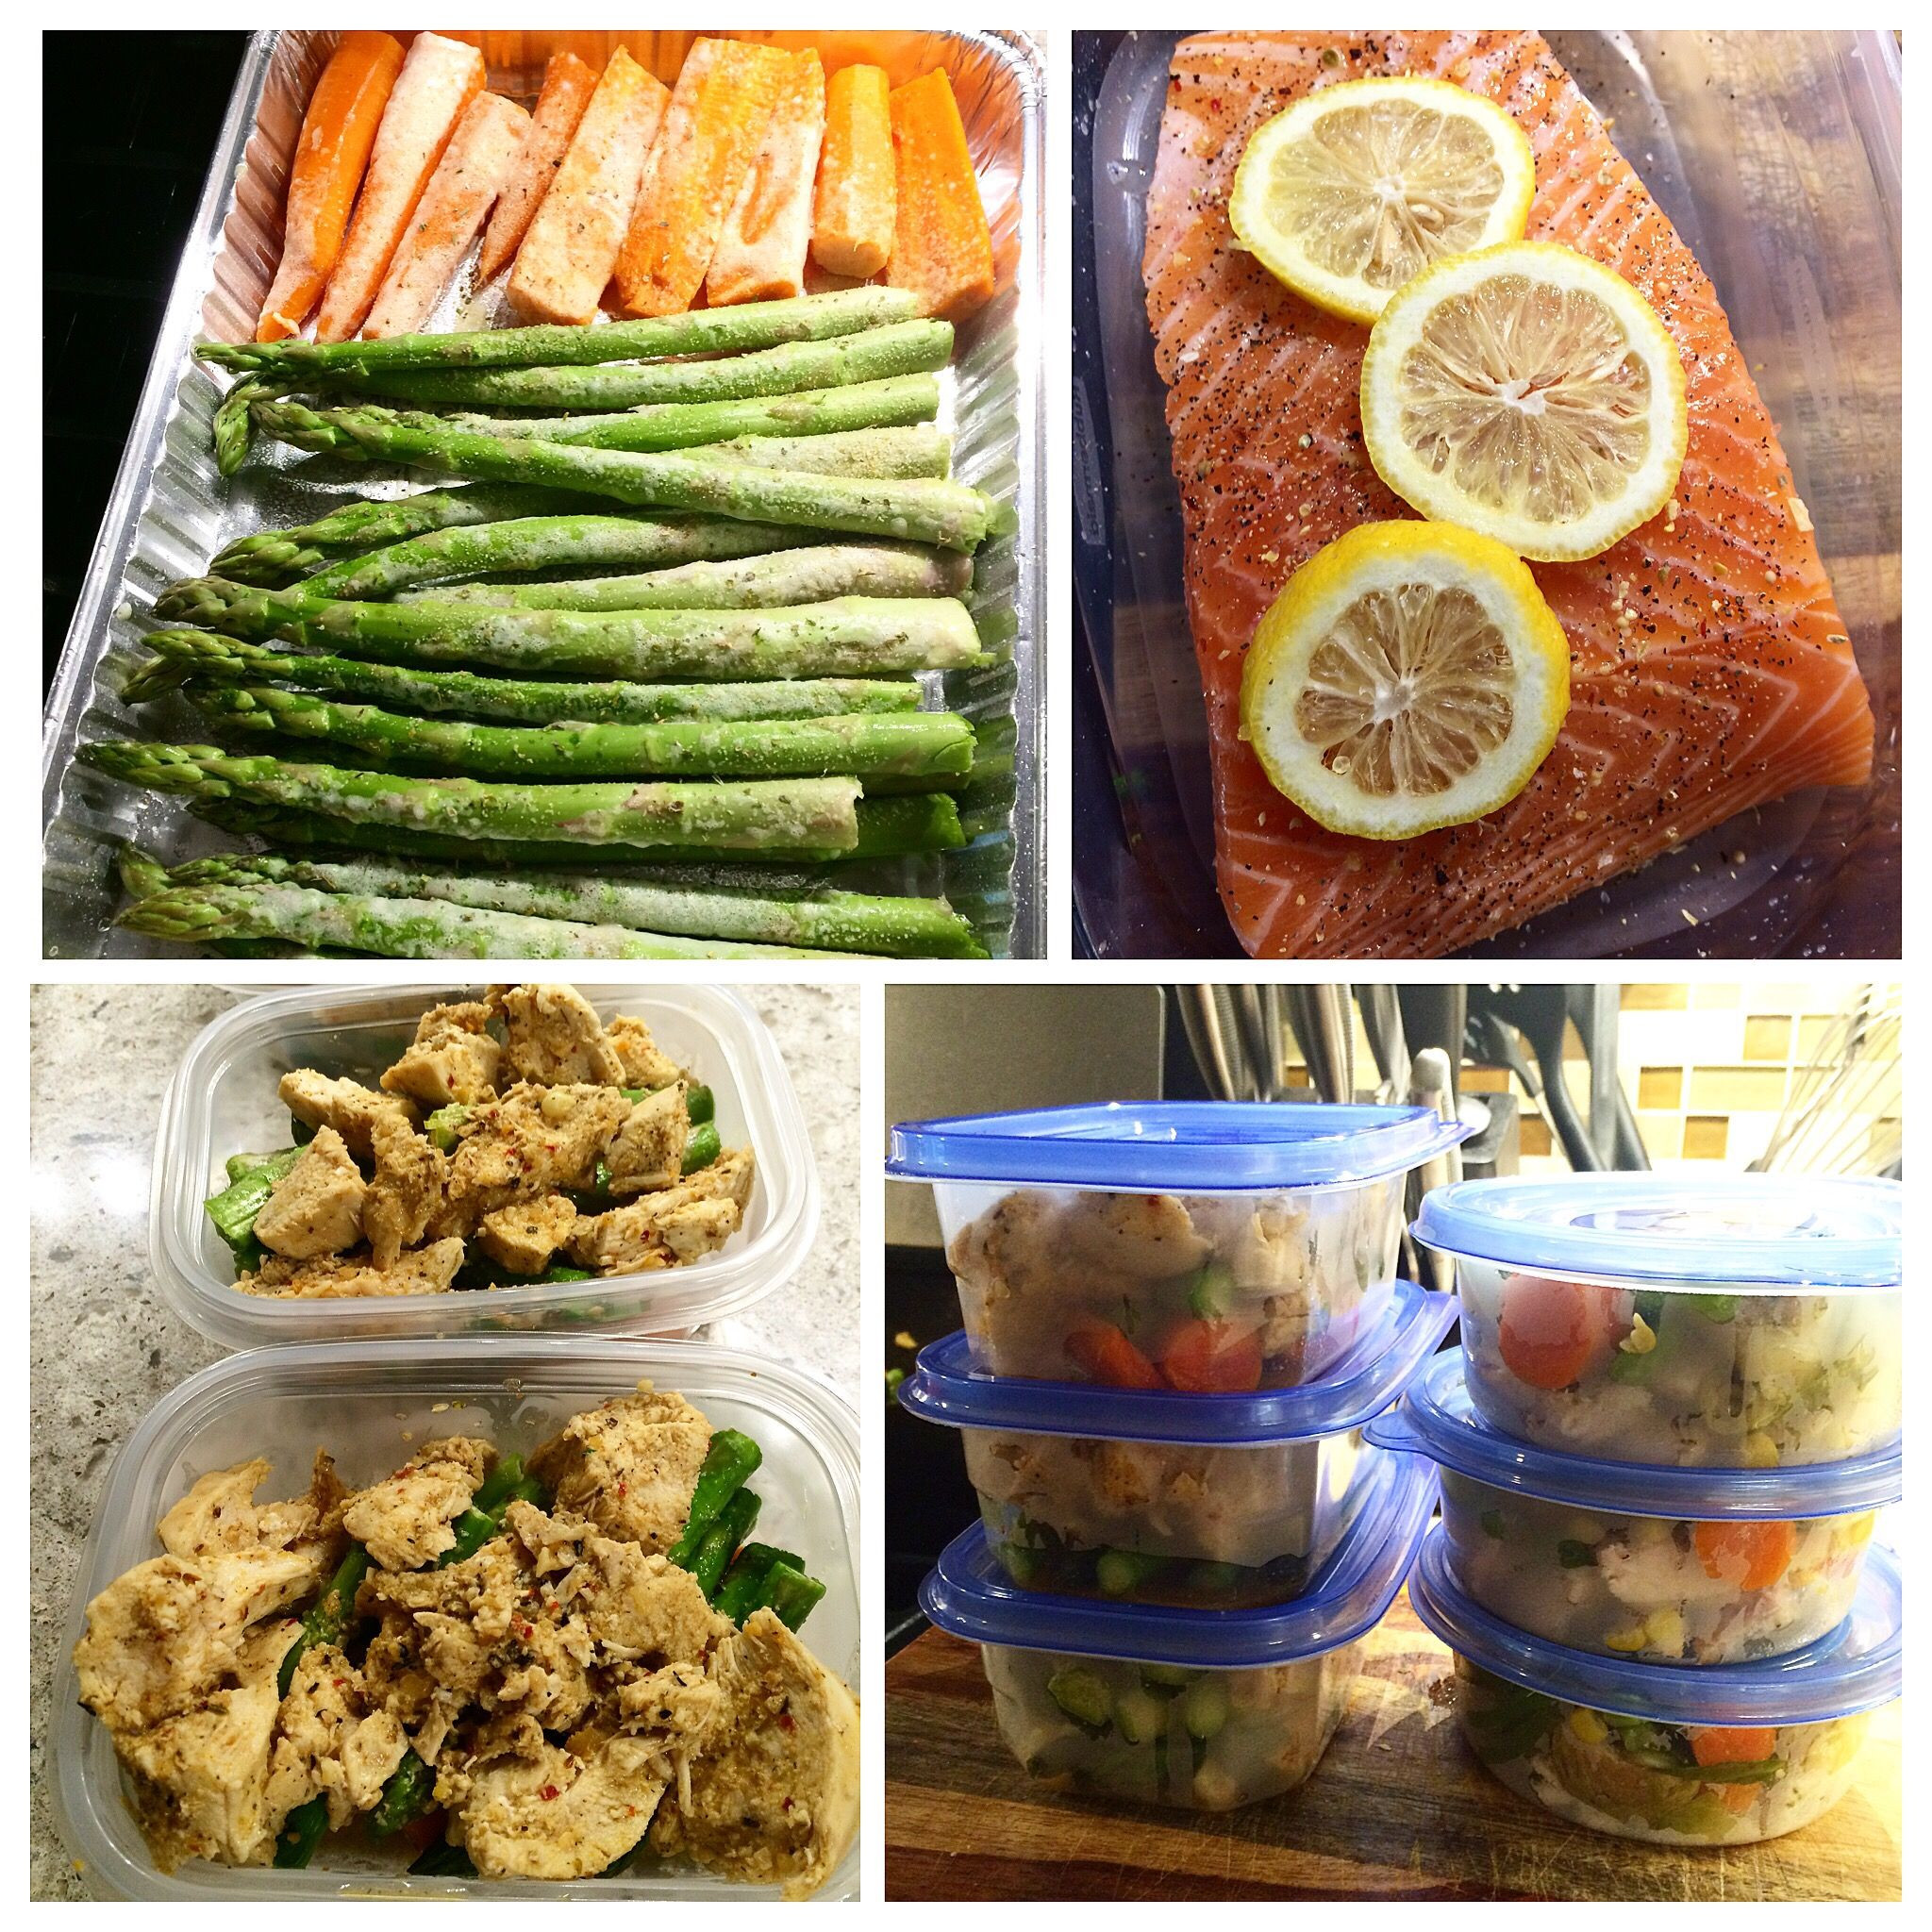 Meal Prep For Low Carb Diet
 Another week of meal prepping high protein low carb and